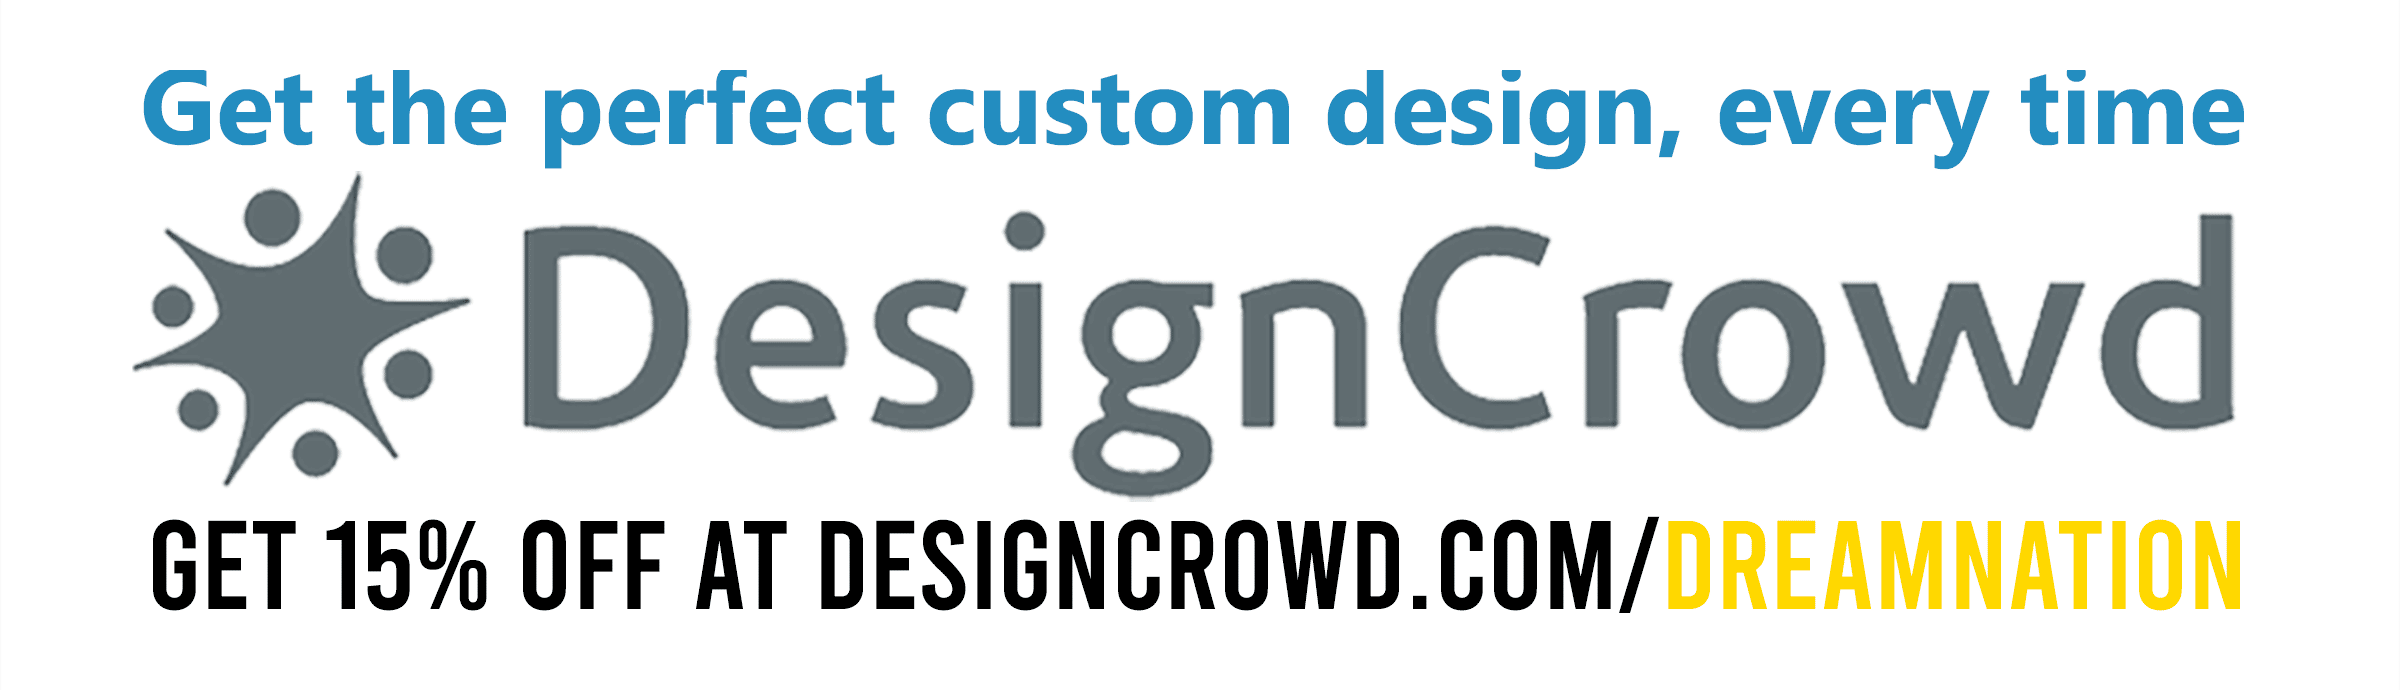 Get 15% off at Designcrowd today!